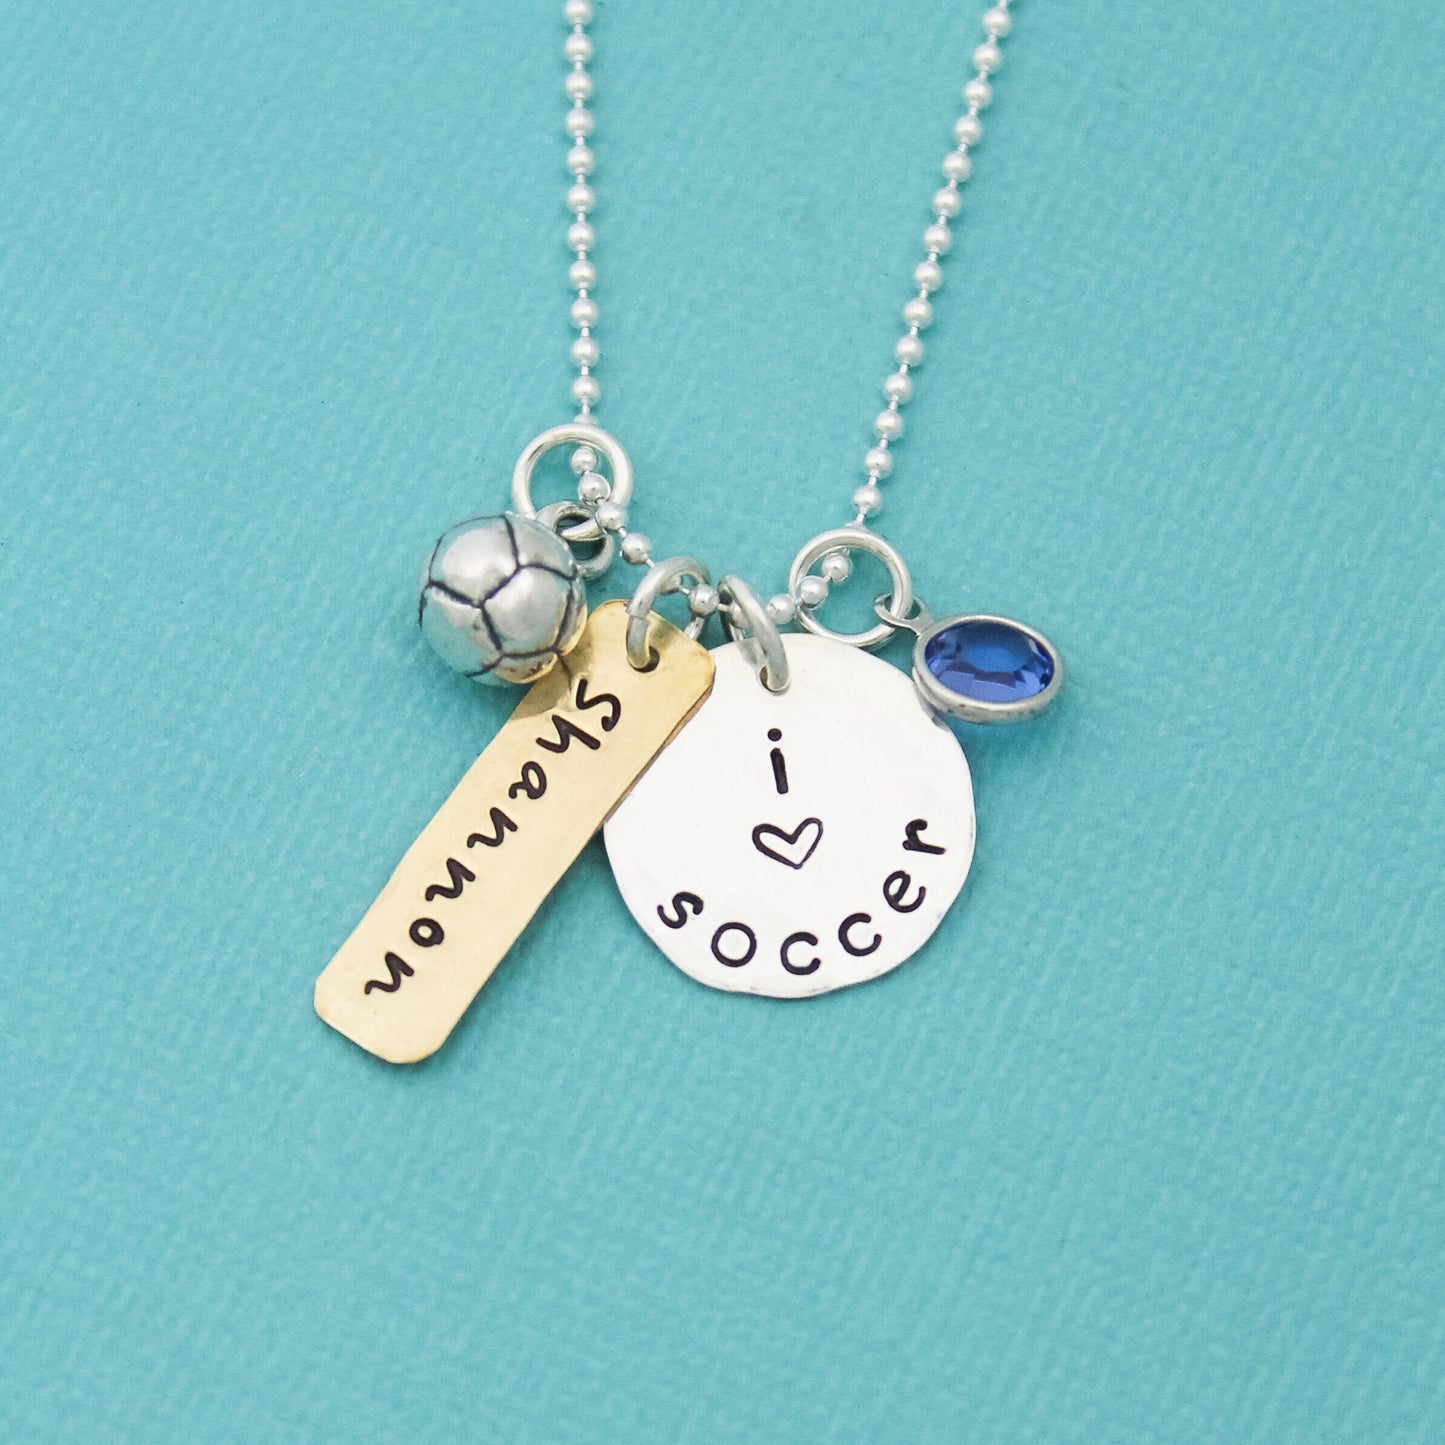 Soccer Necklace, Field Hockey Necklace, Lacrosse Necklace, Softball Necklace in Sterling Silver and Brass Perfect for Team Gifts